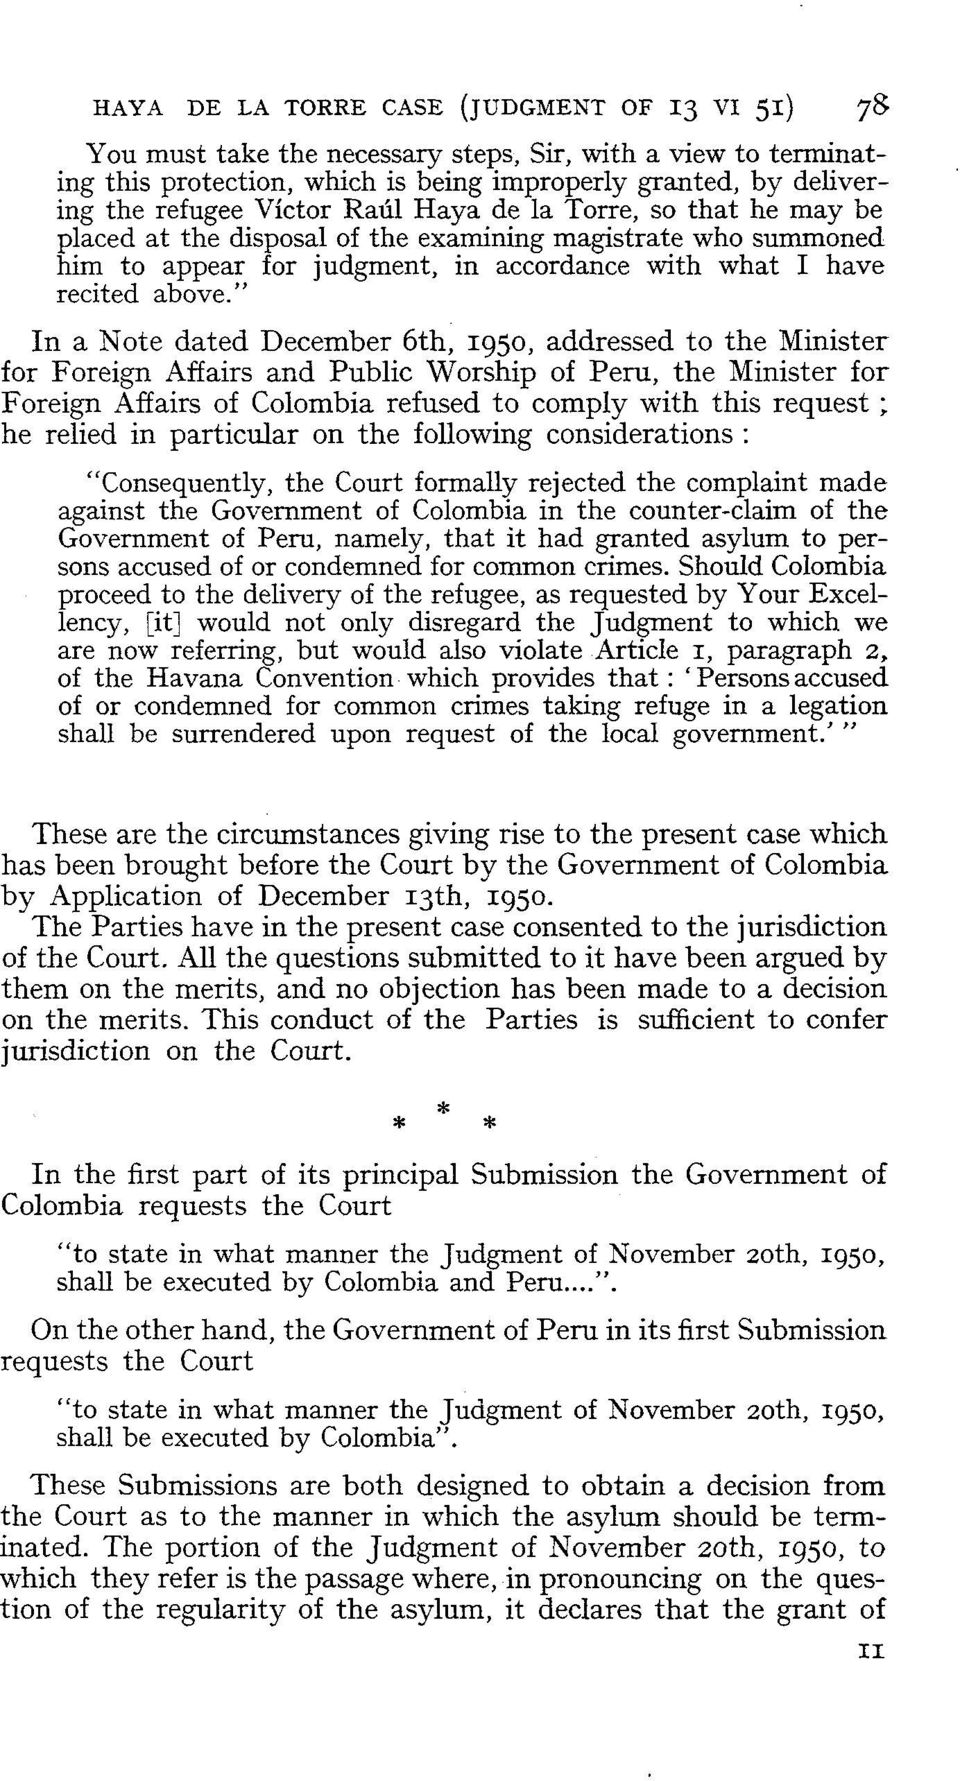 " In a Note dated December 6th, 1950, addressed to the Minister for Foreign Affairs and Public Worship of Peru, the Minister for Foreign Affairs of Colombia refused to comply with this request ; he